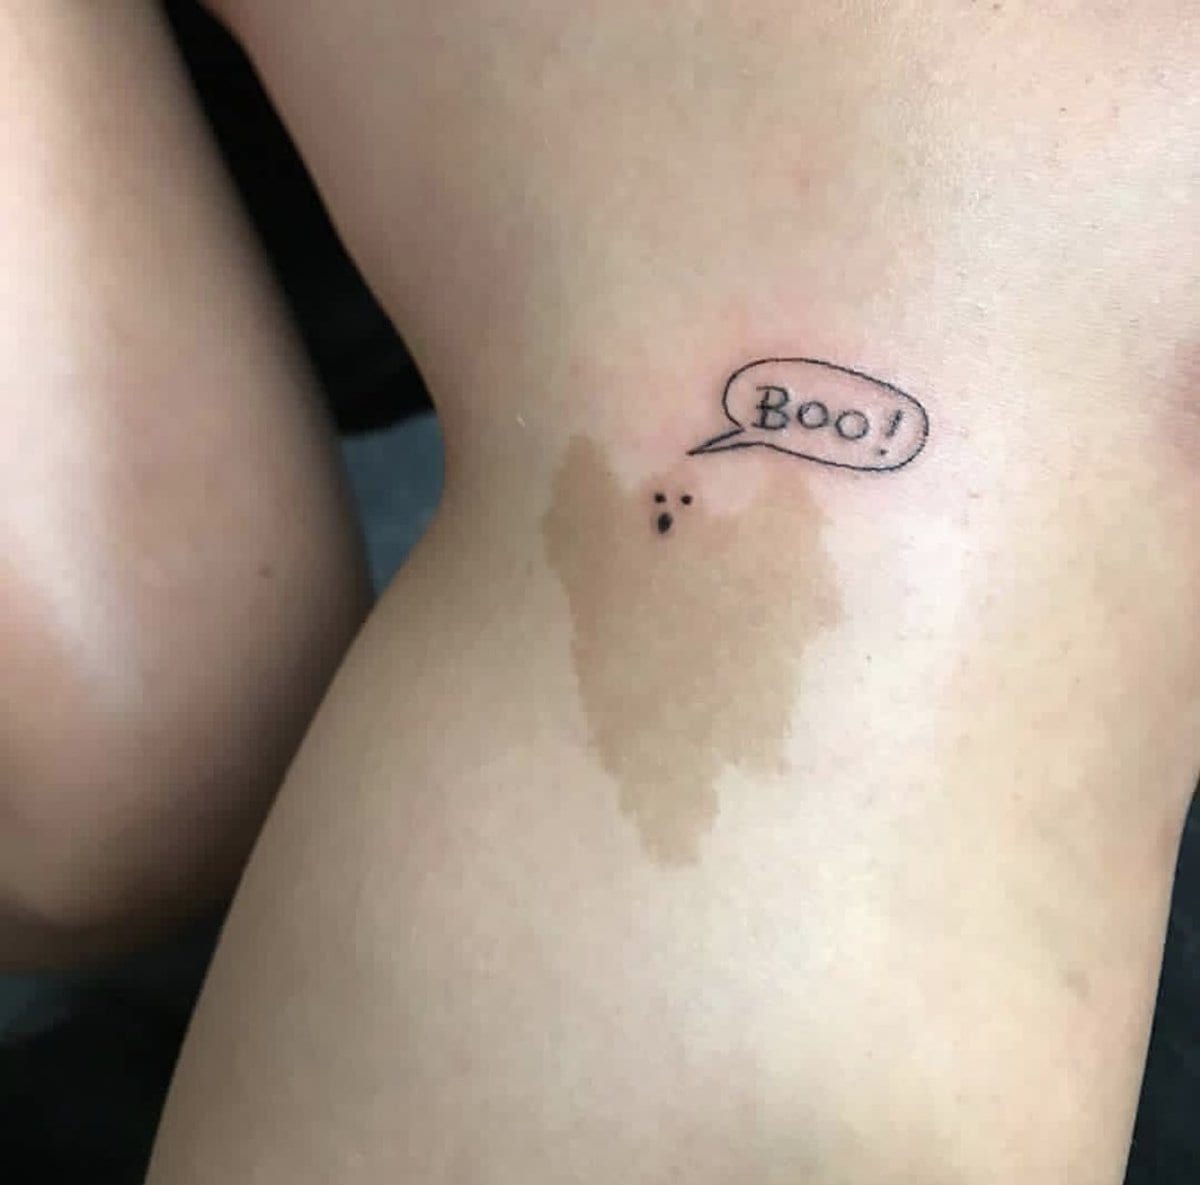 Here is another clever tattoo idea, this time in conjunction with a birthmark. As a matter of fact, this birthmark does look kind of like a ghost, which makes it even more hilarious to tattoo eyes, a mouth, and the word Boo above it that much more hilarious.